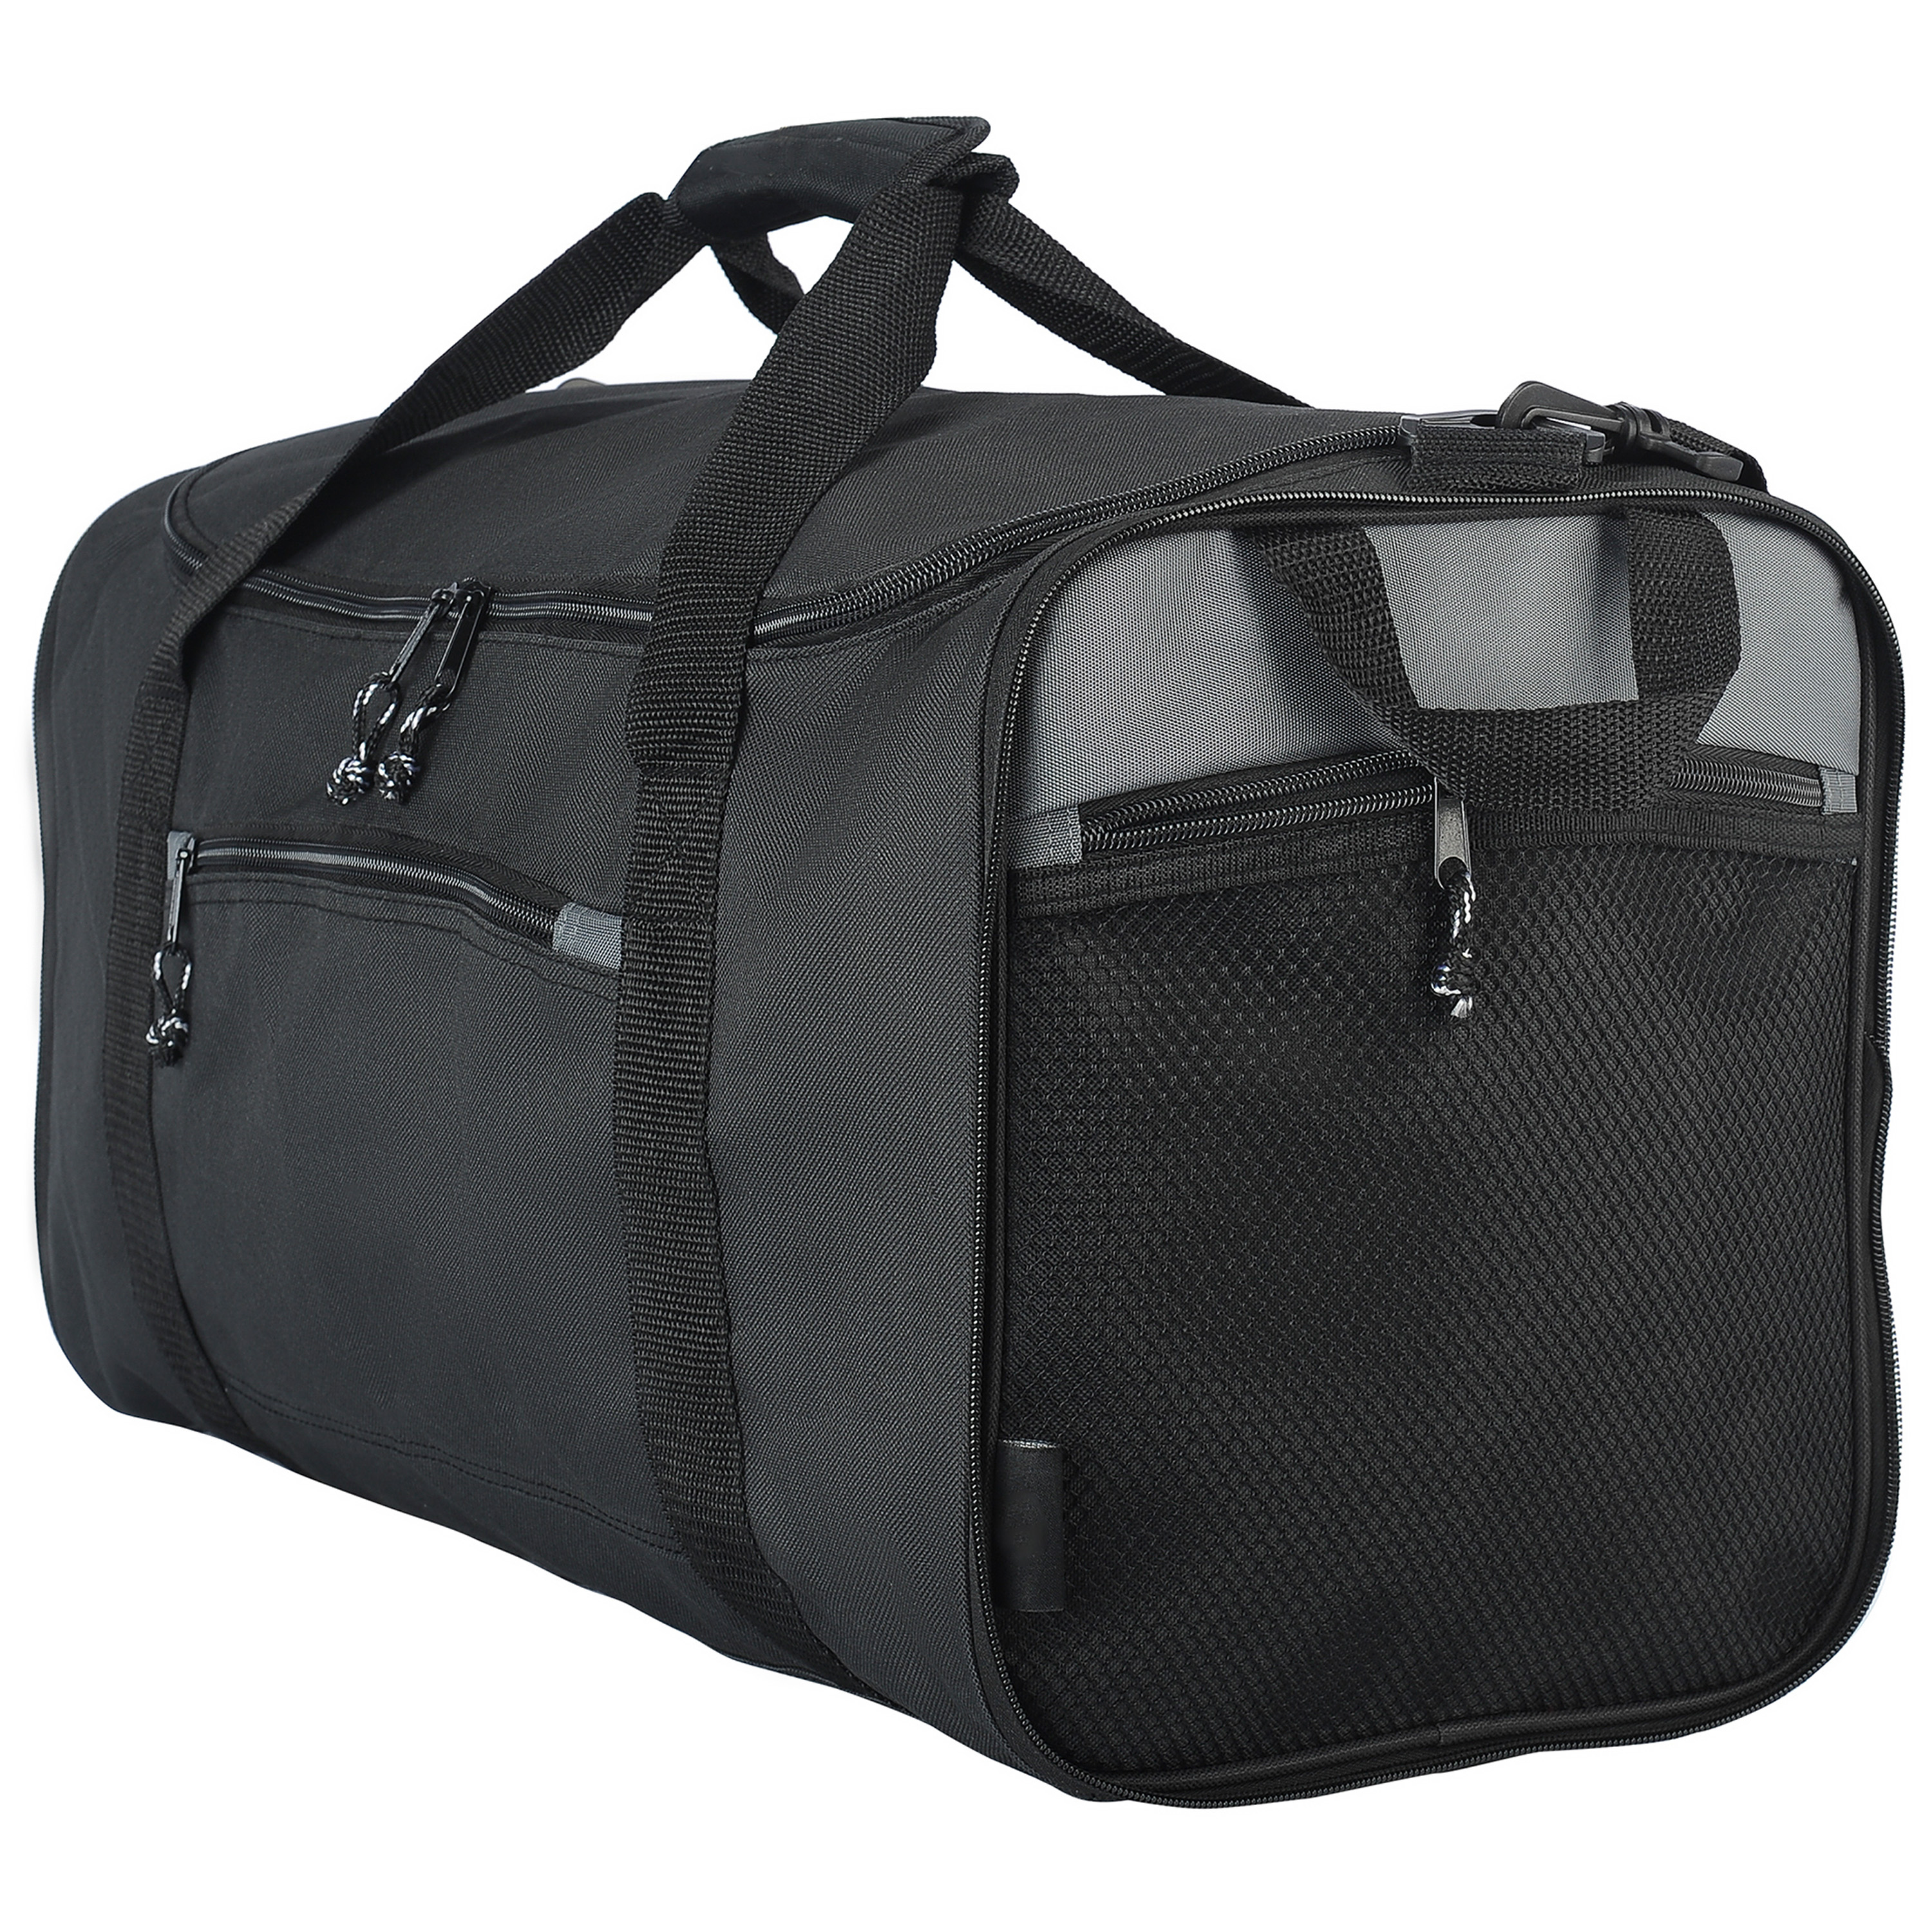 Protégé 20" Collapsible Sport and Travel Duffel Bag, Black - image 4 of 11